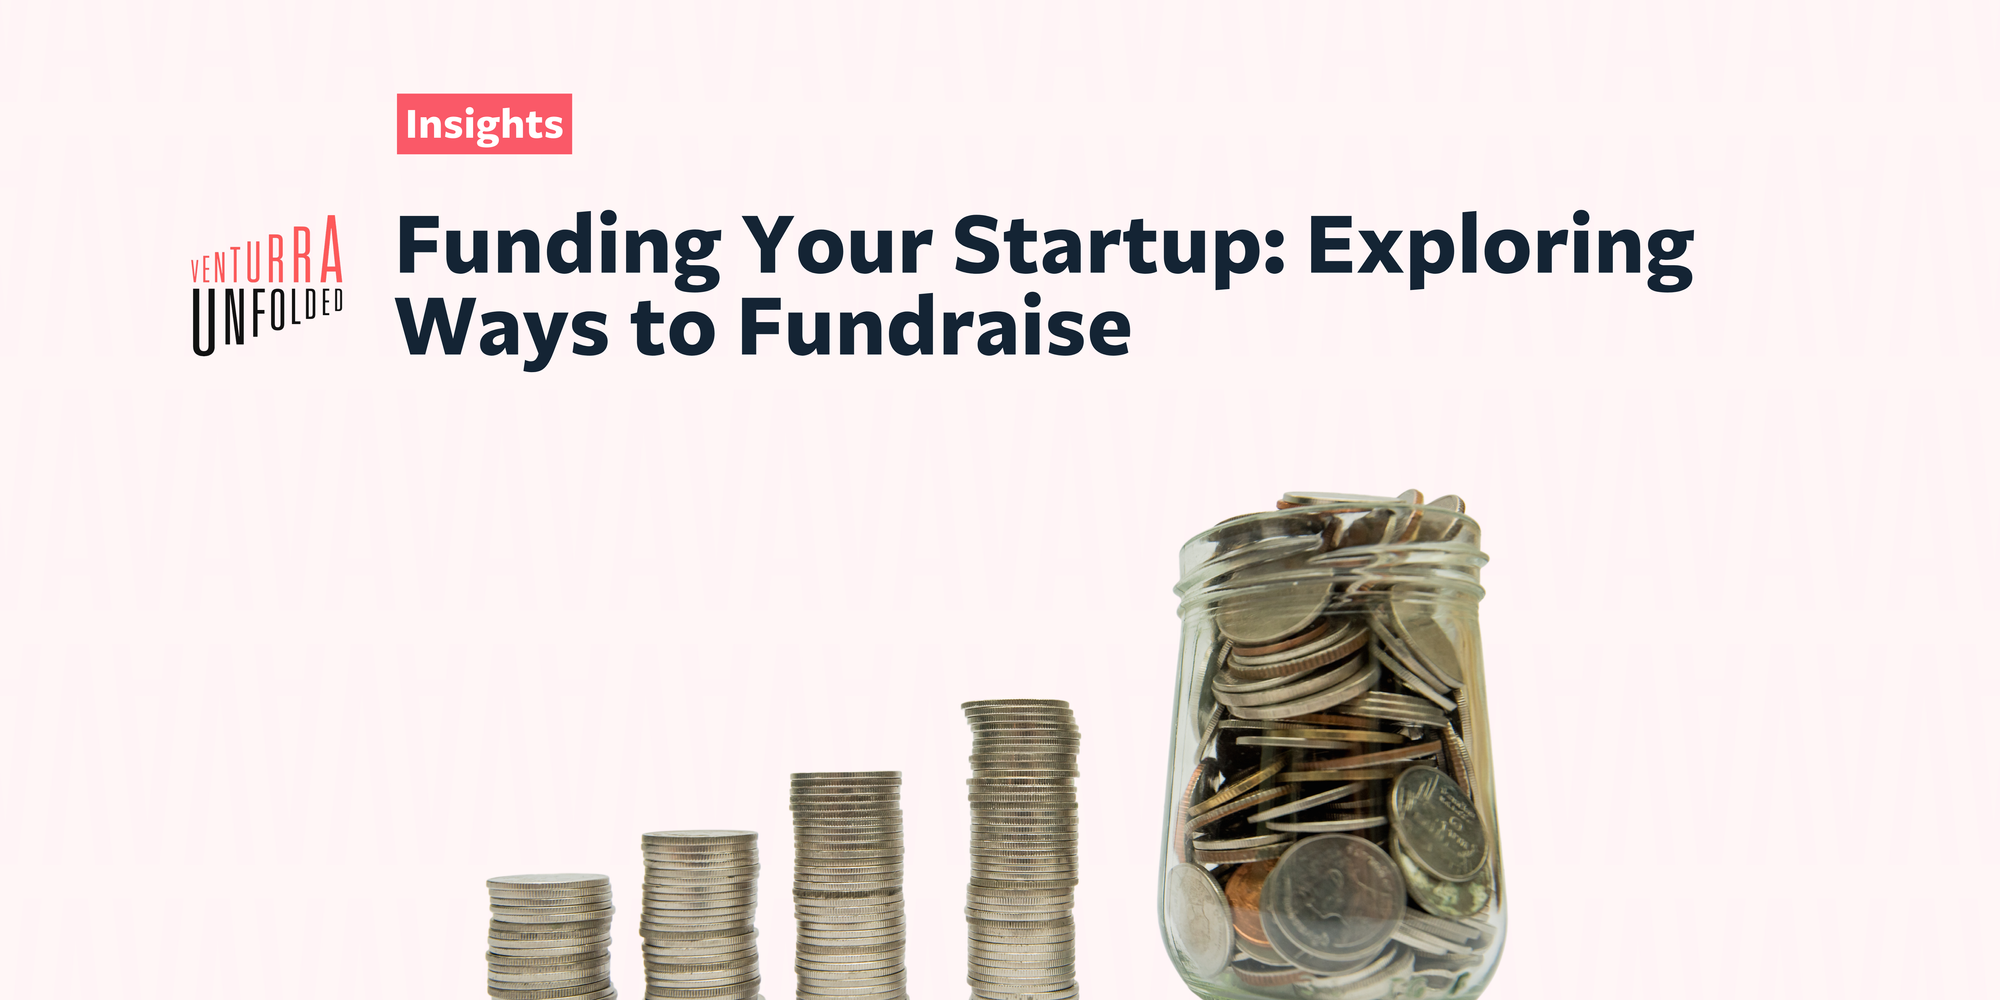 Funding Your Startup: Exploring Ways to Fundraise